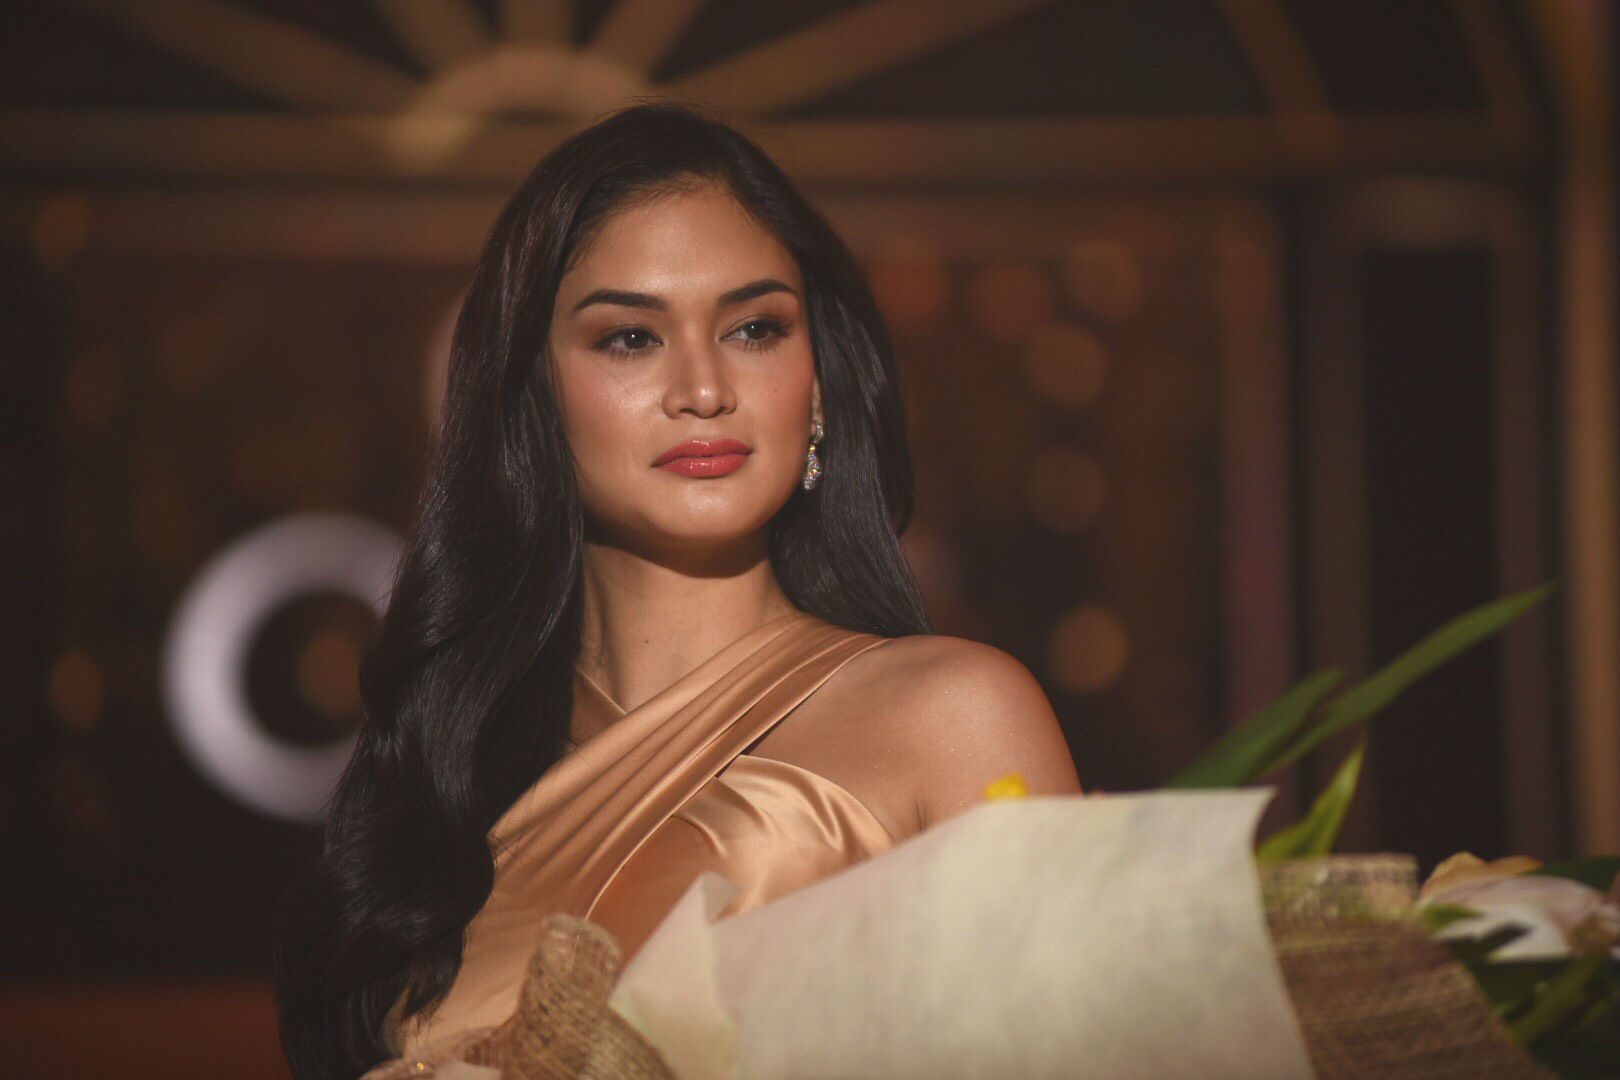 Pia Wurtzbach to critics: I don’t have to post everything on social media